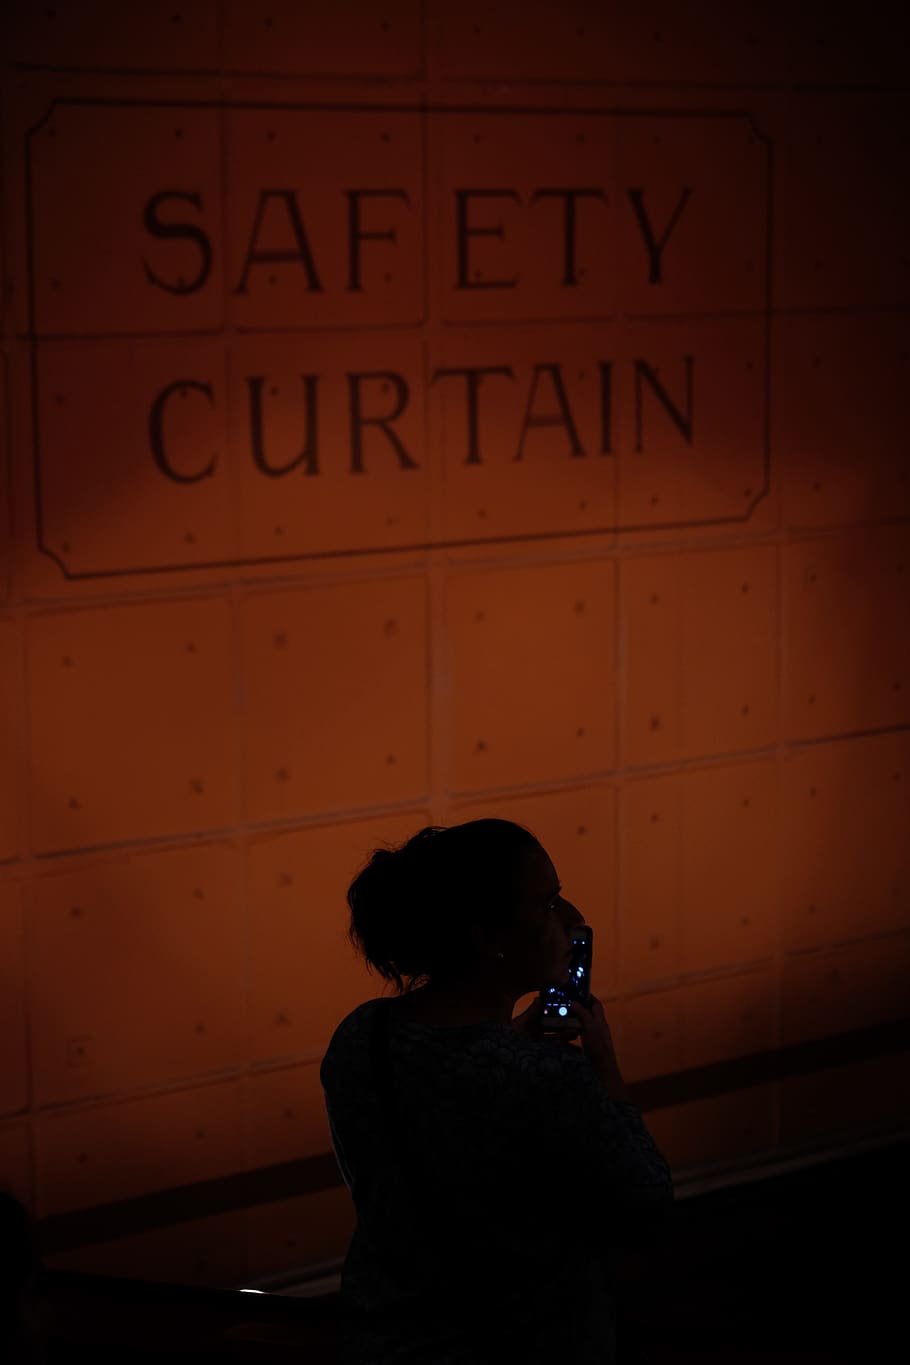 Safety Curtain sign during night time, photgraphy, picture, shadow